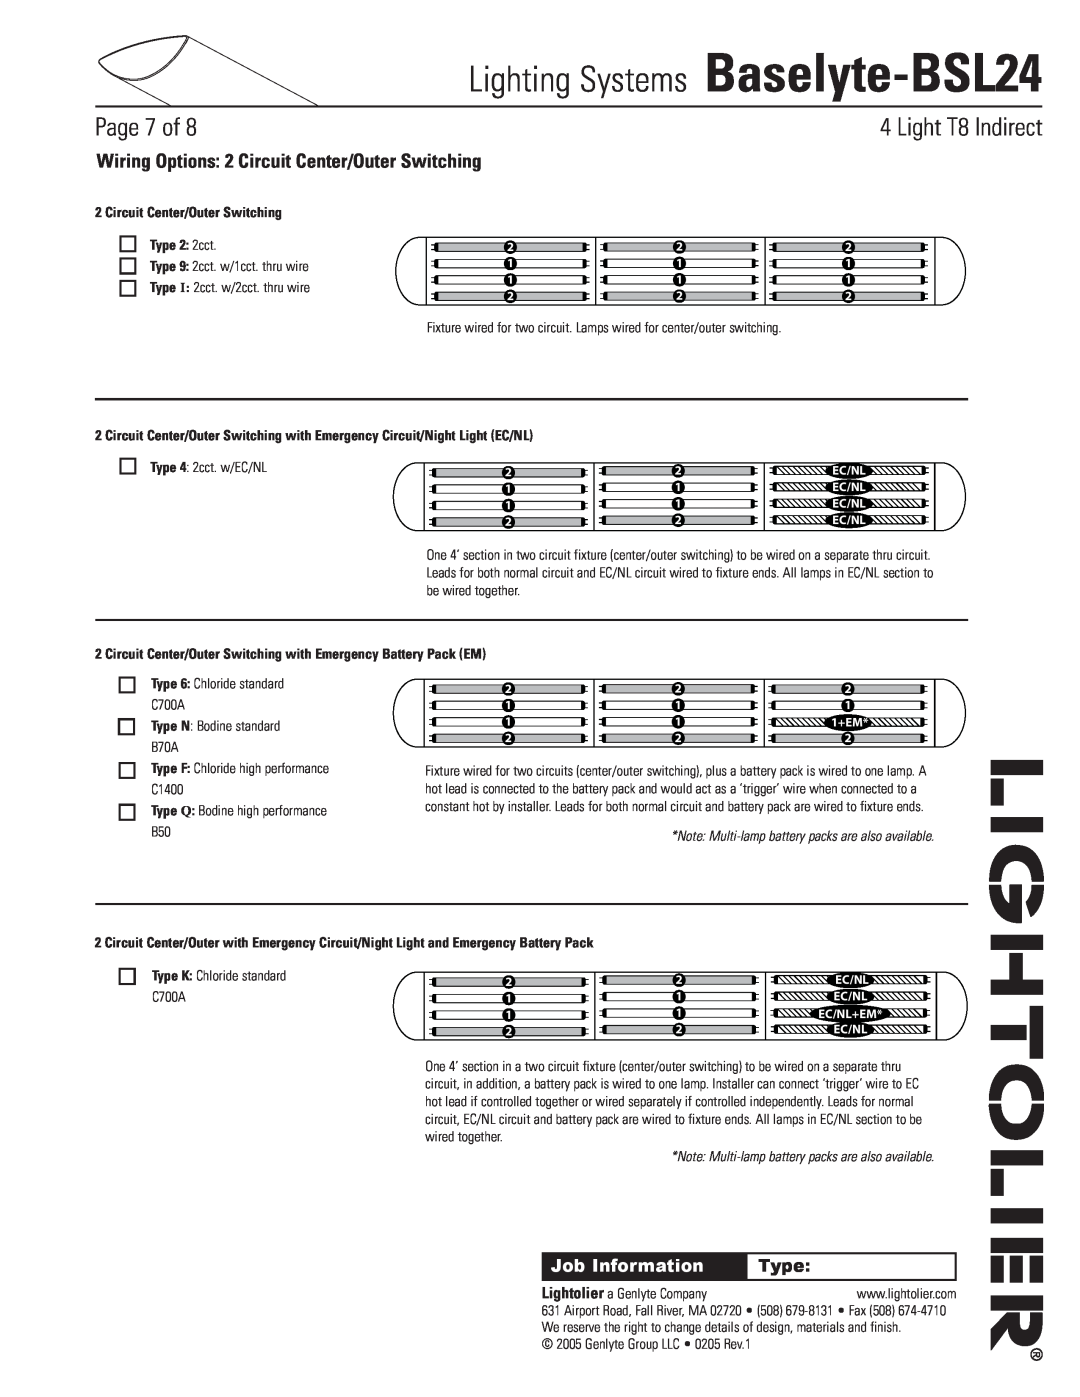 Lightolier Baselyte-BSL24 Wiring Options 2 Circuit Center/Outer Switching, Circuit Center/Outer Switching Type 2 2cct 